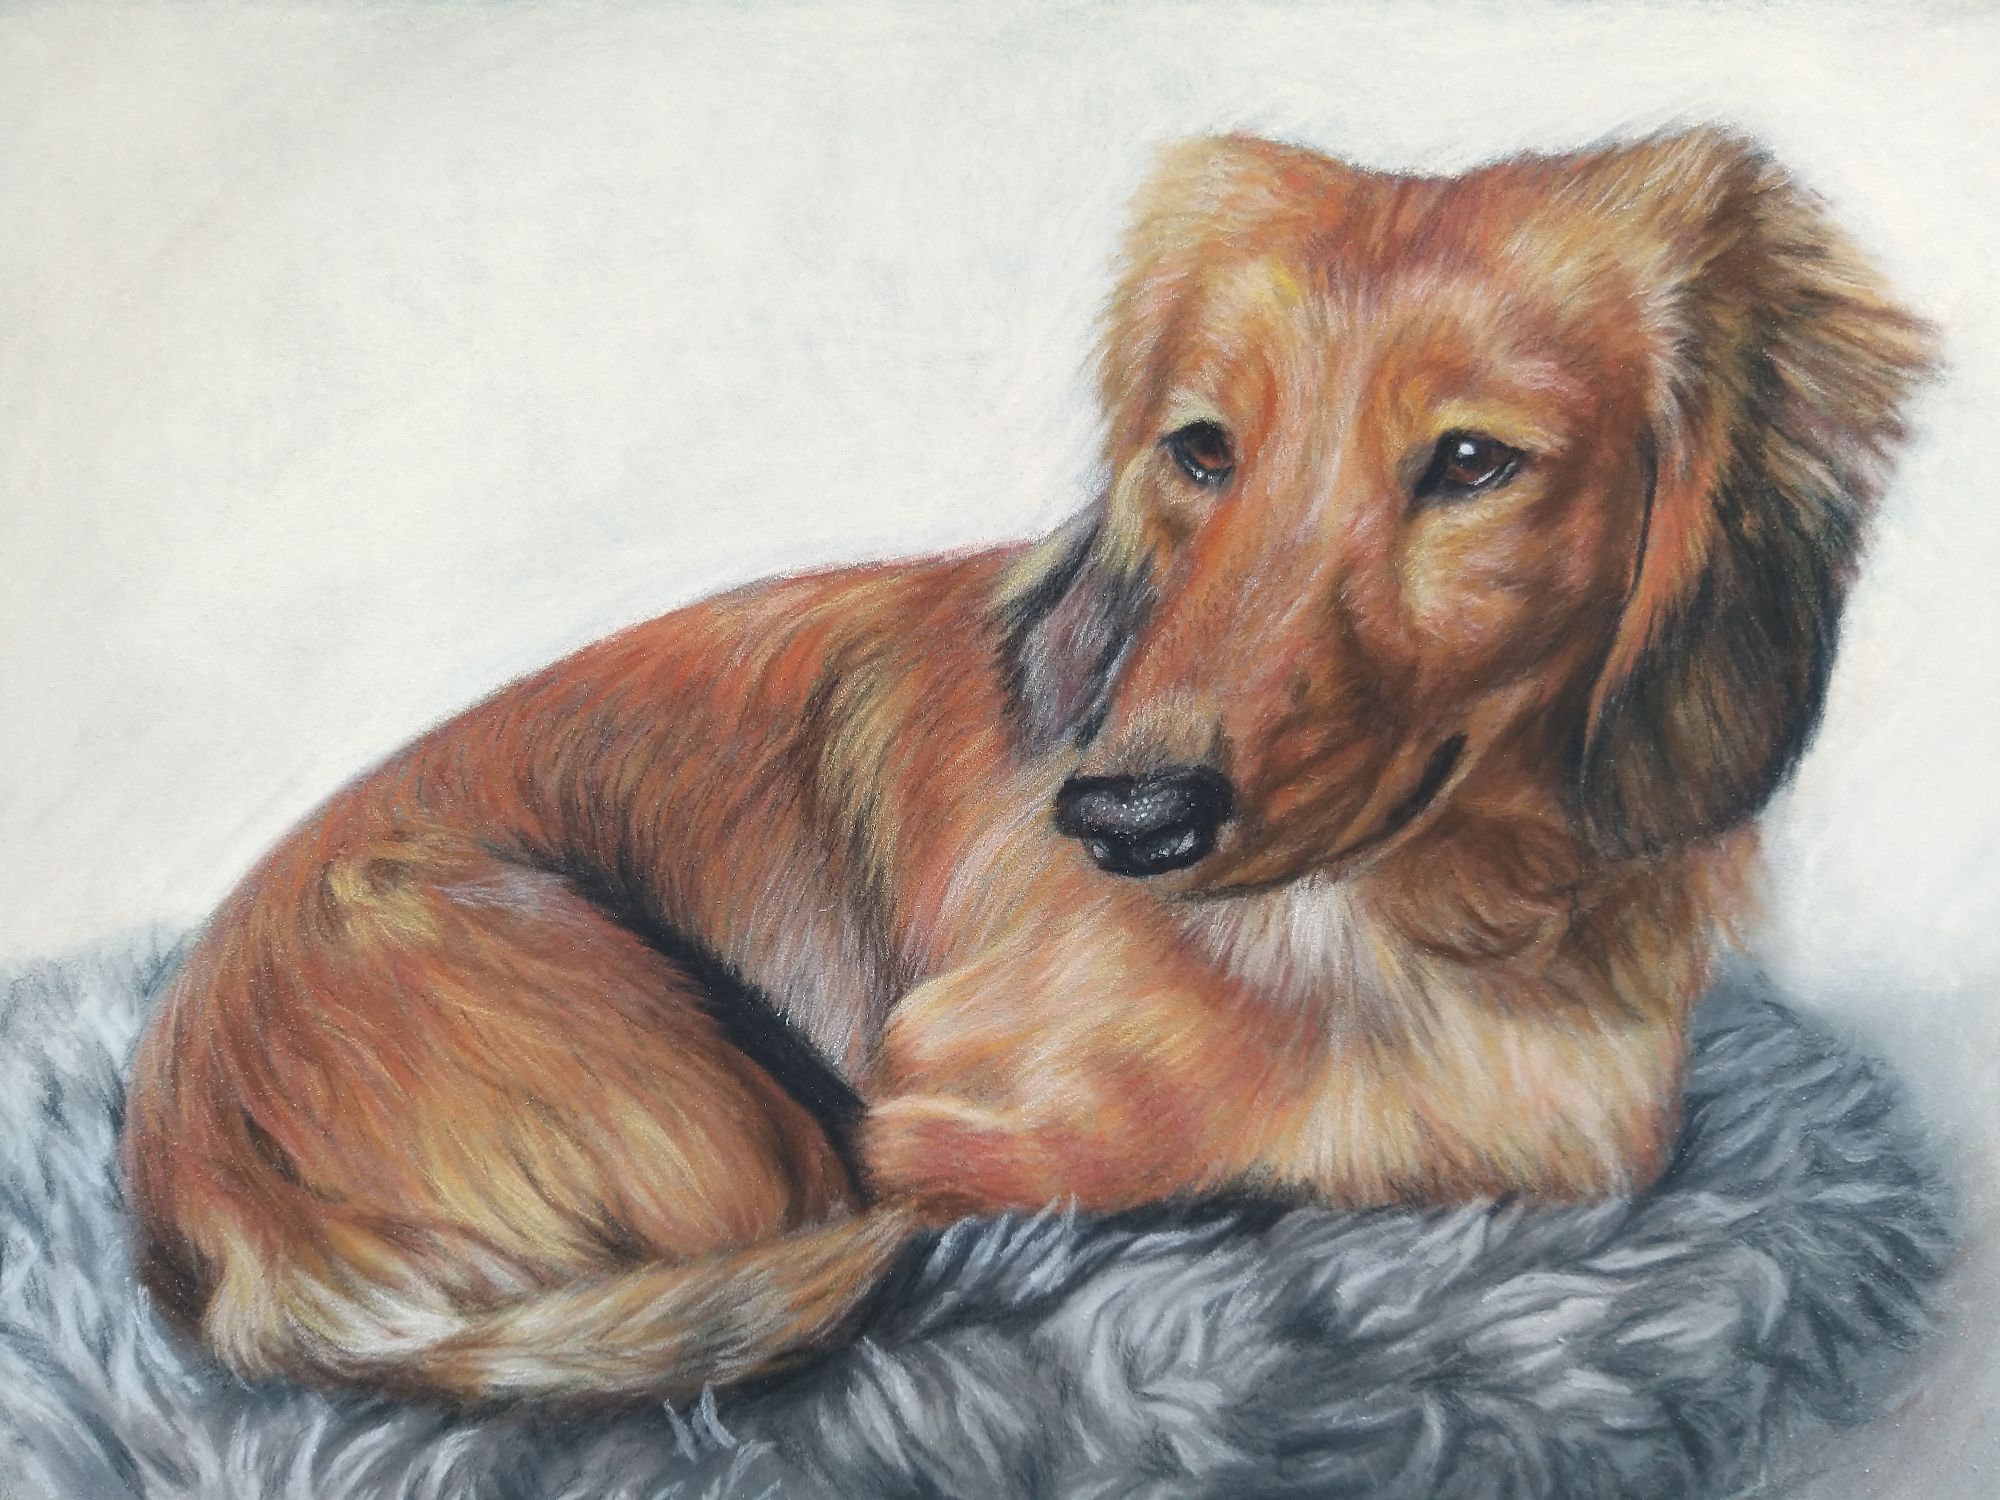 Dog Pencil Portraits Gallery - Commission Your Own Here